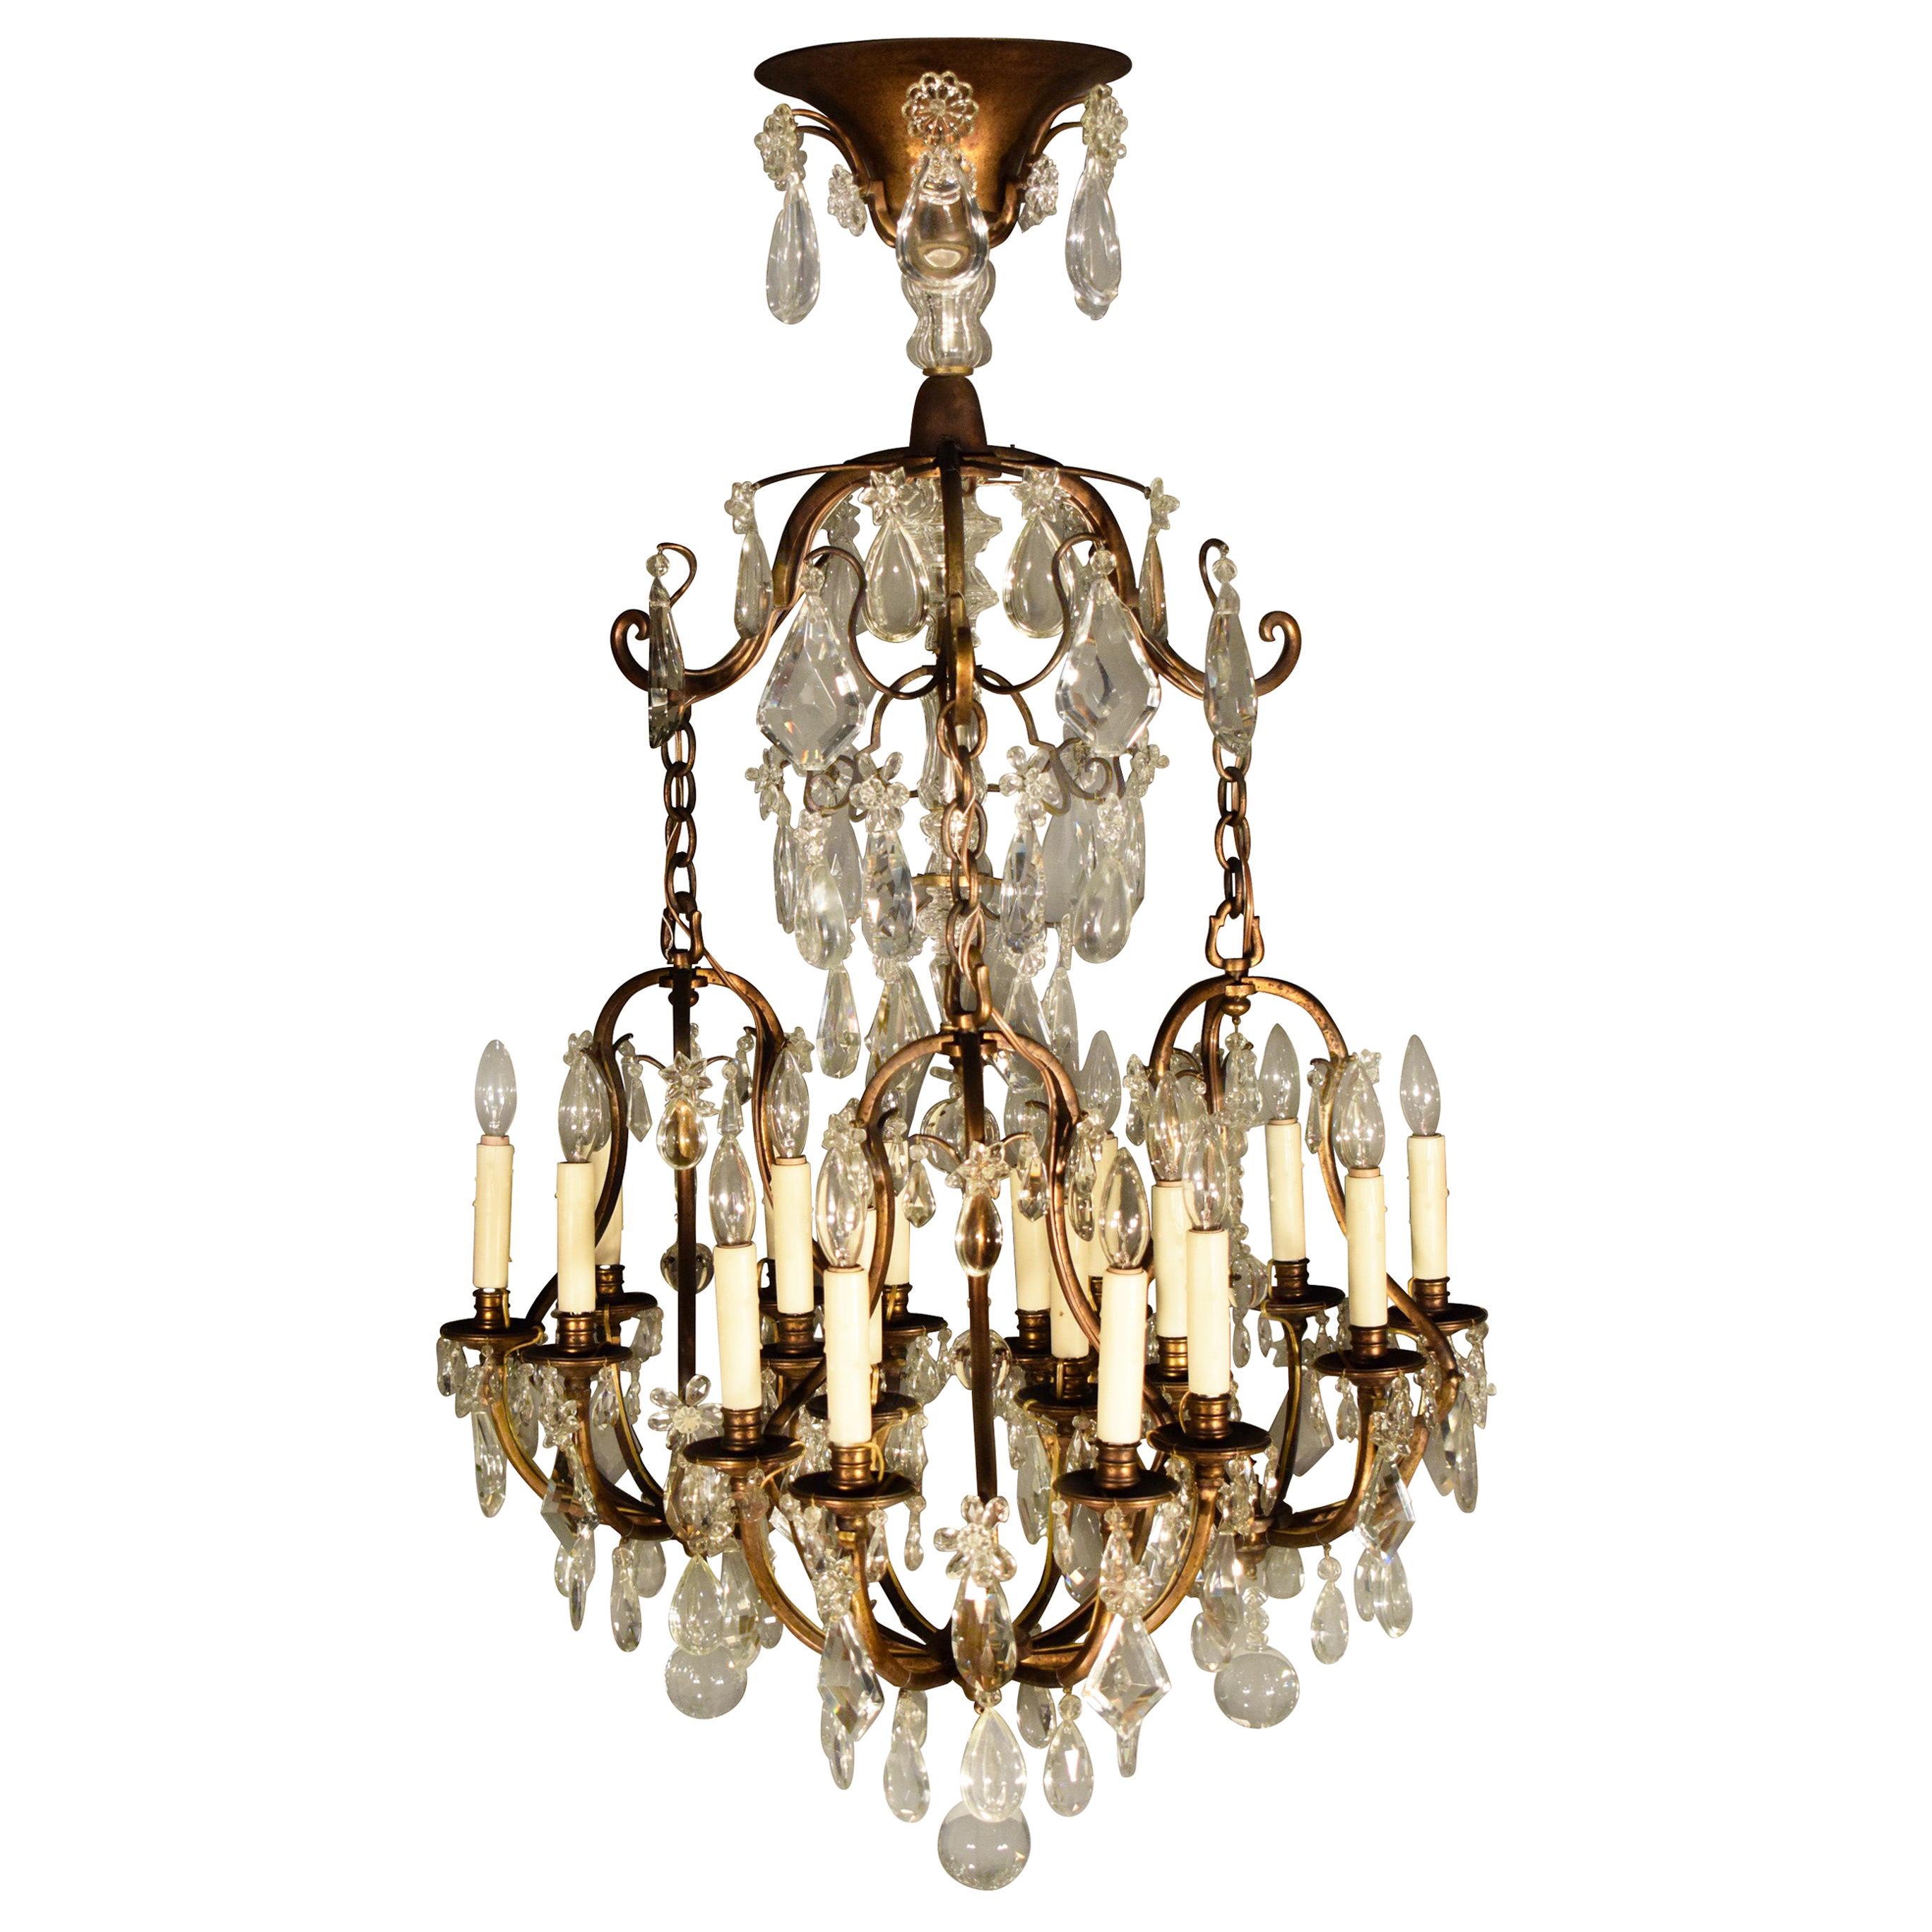 Very Fine 19th Century Gilt Bronze and Crystal Chandelier For Sale